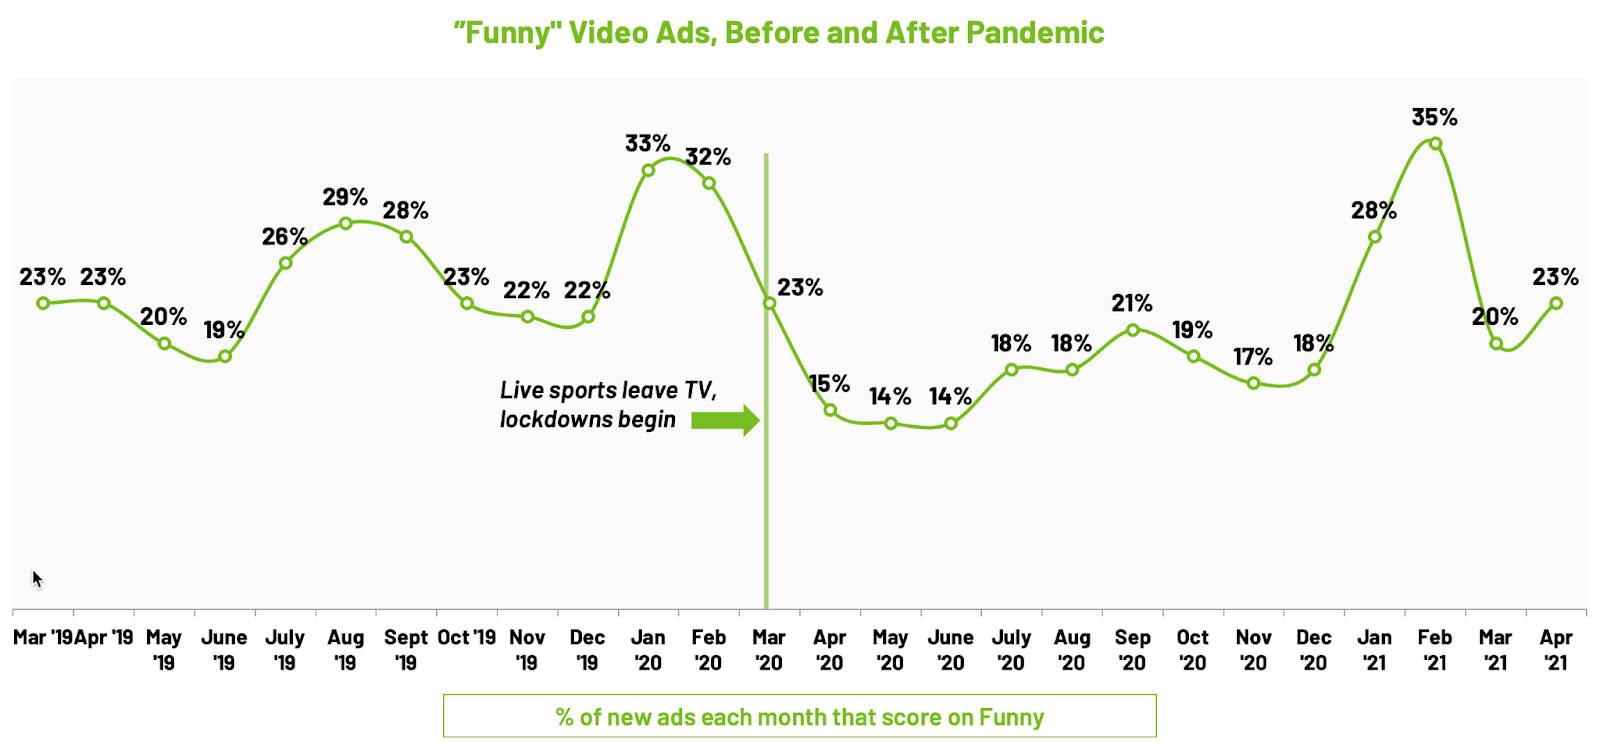 How to Create Funny Video Ads Without Compromising Your Brand